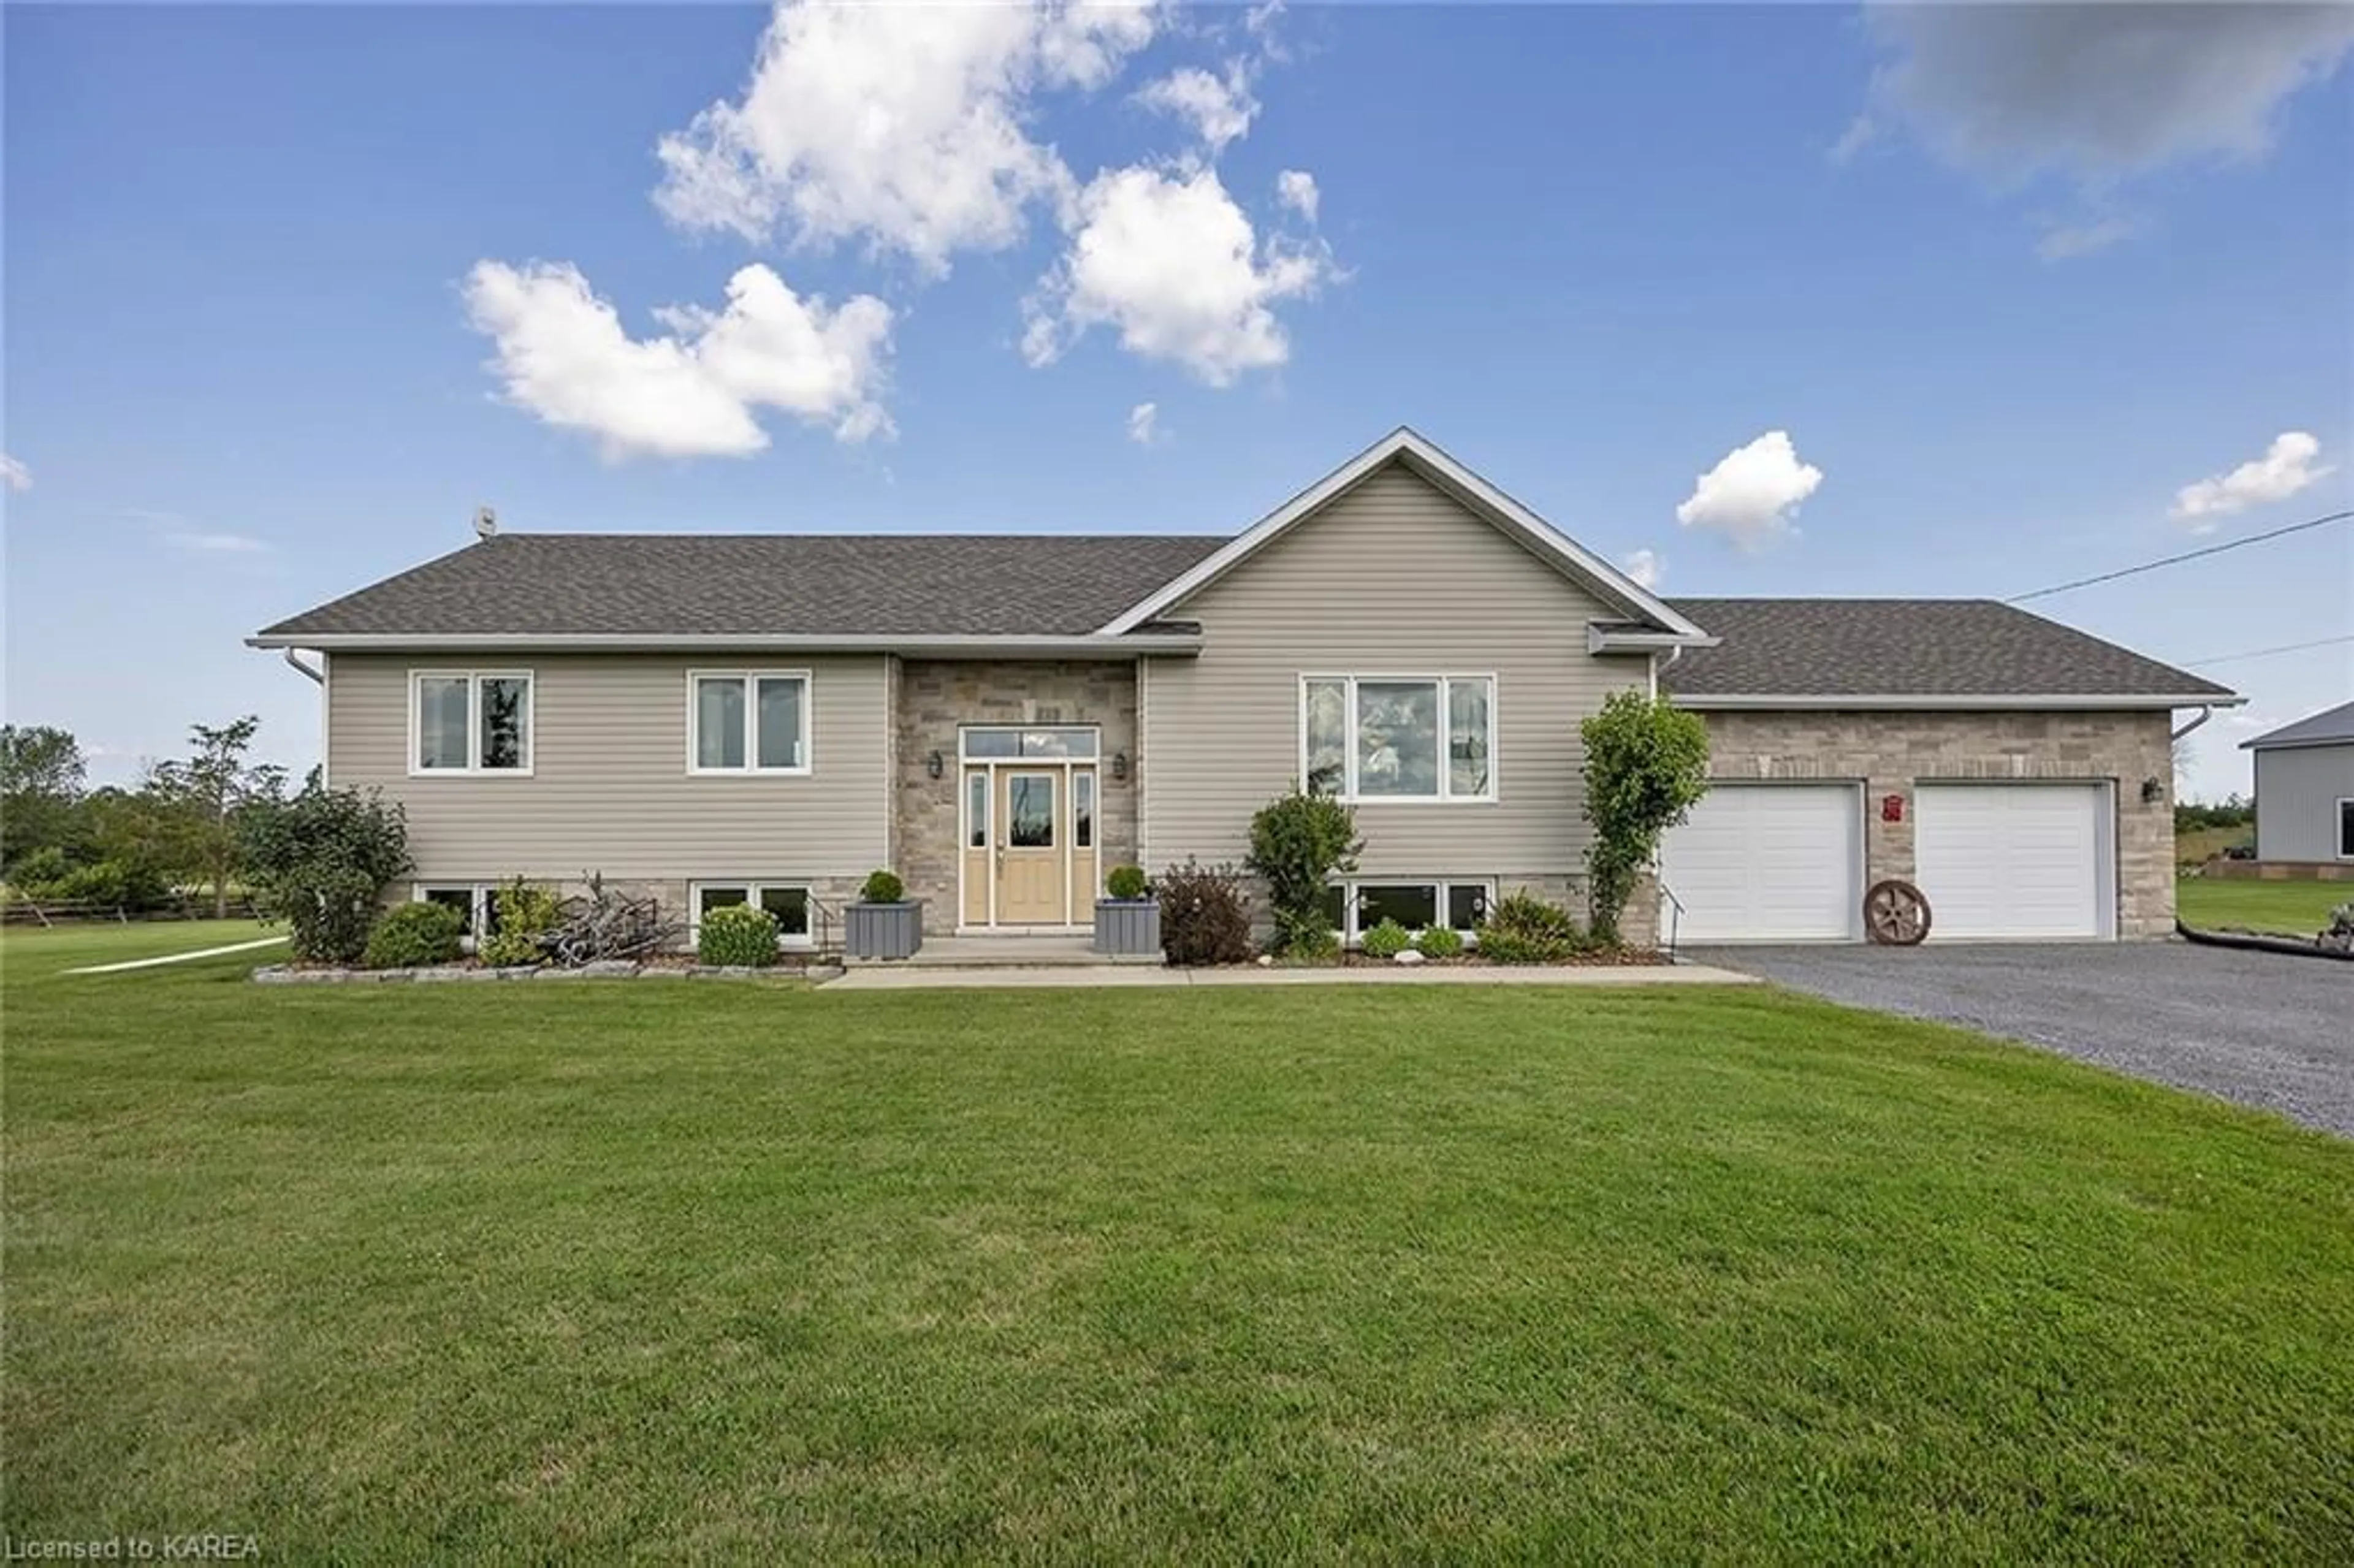 Frontside or backside of a home for 511 Glennelm Rd, Greater Napanee Ontario K0K 2W0